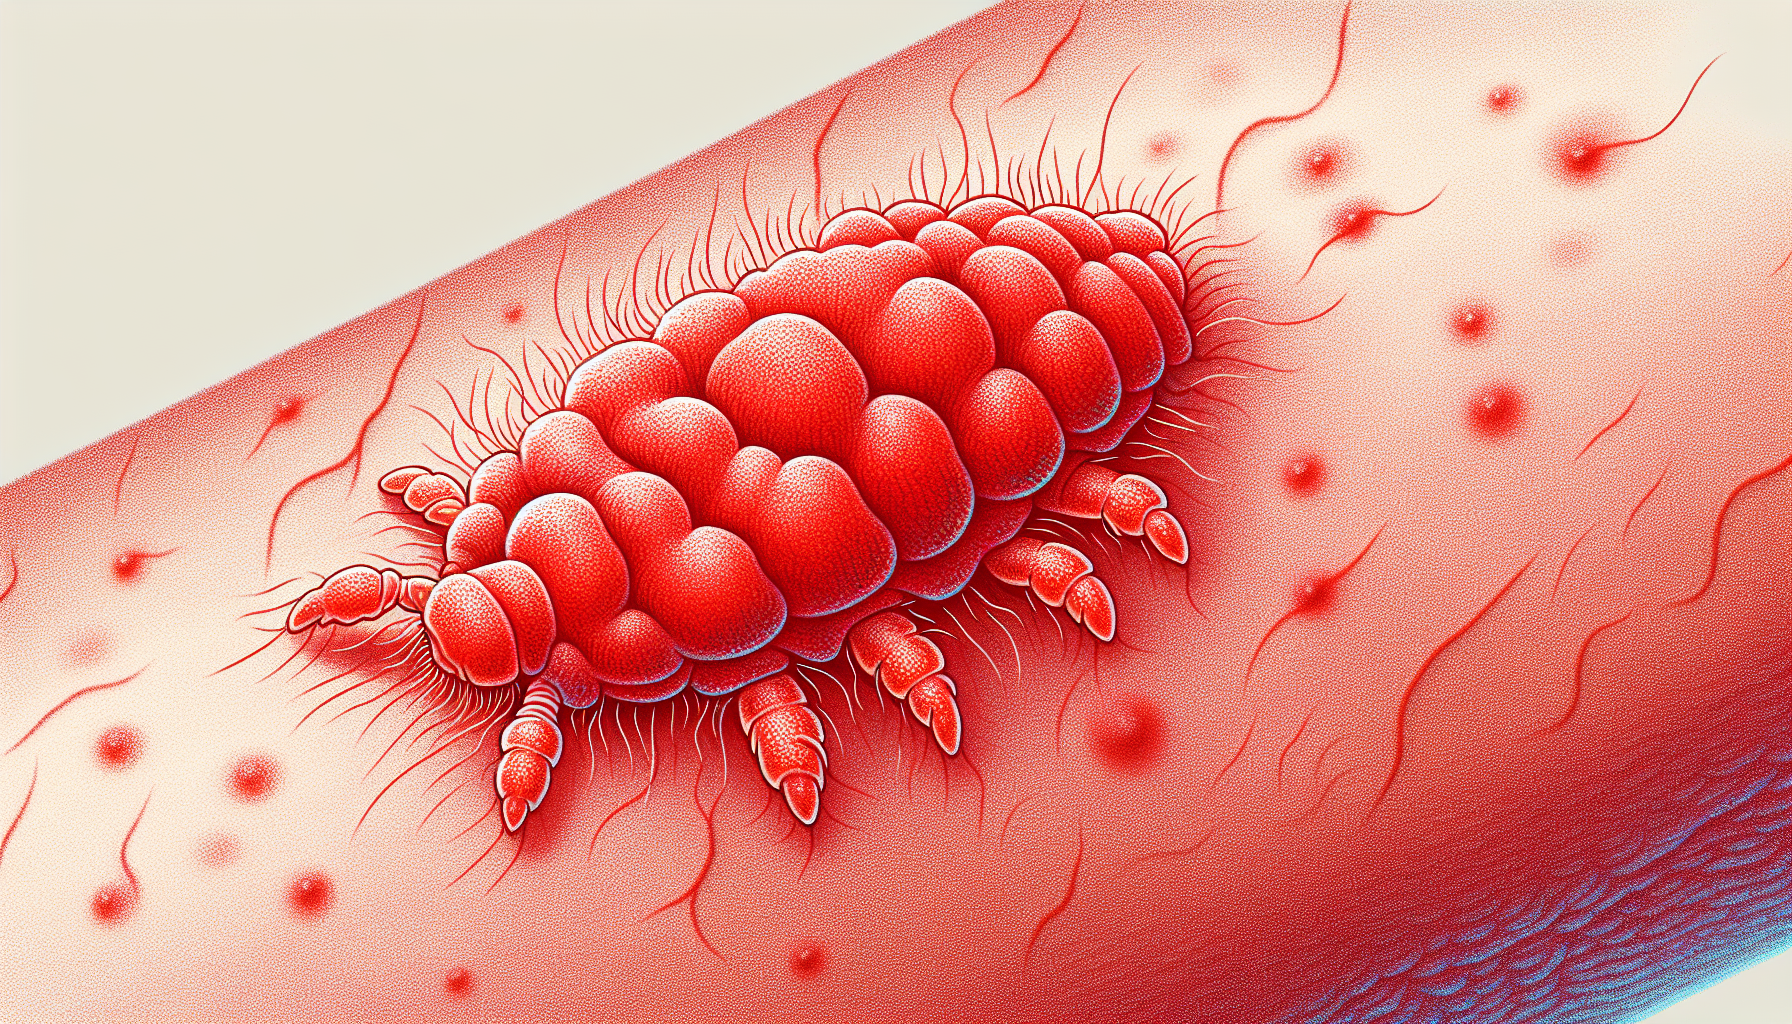 Can You Always Tell If You Have Scabies?